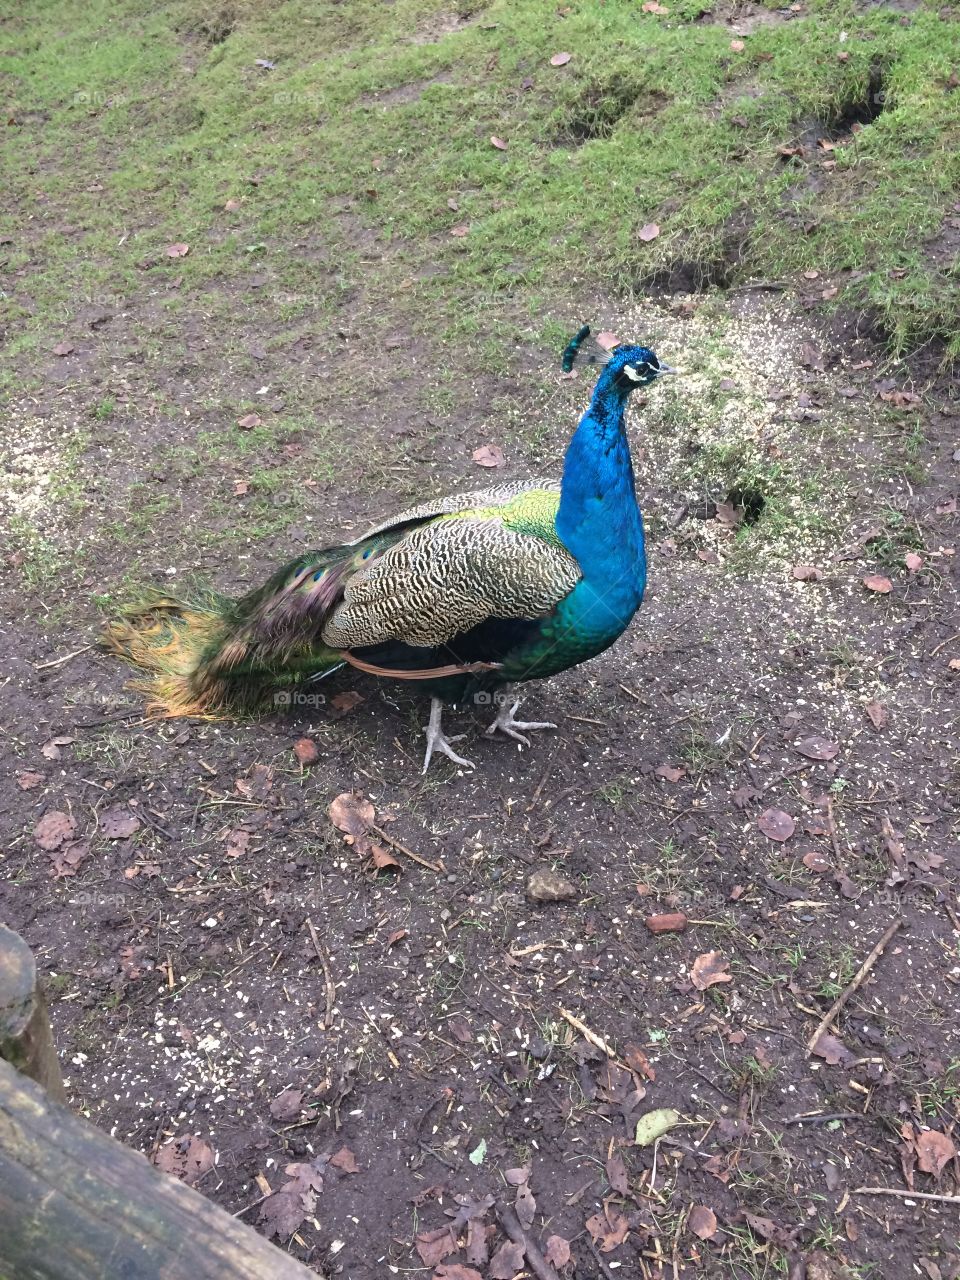 Peacock poses nicely until my shaky hands finally takes a decent photo 